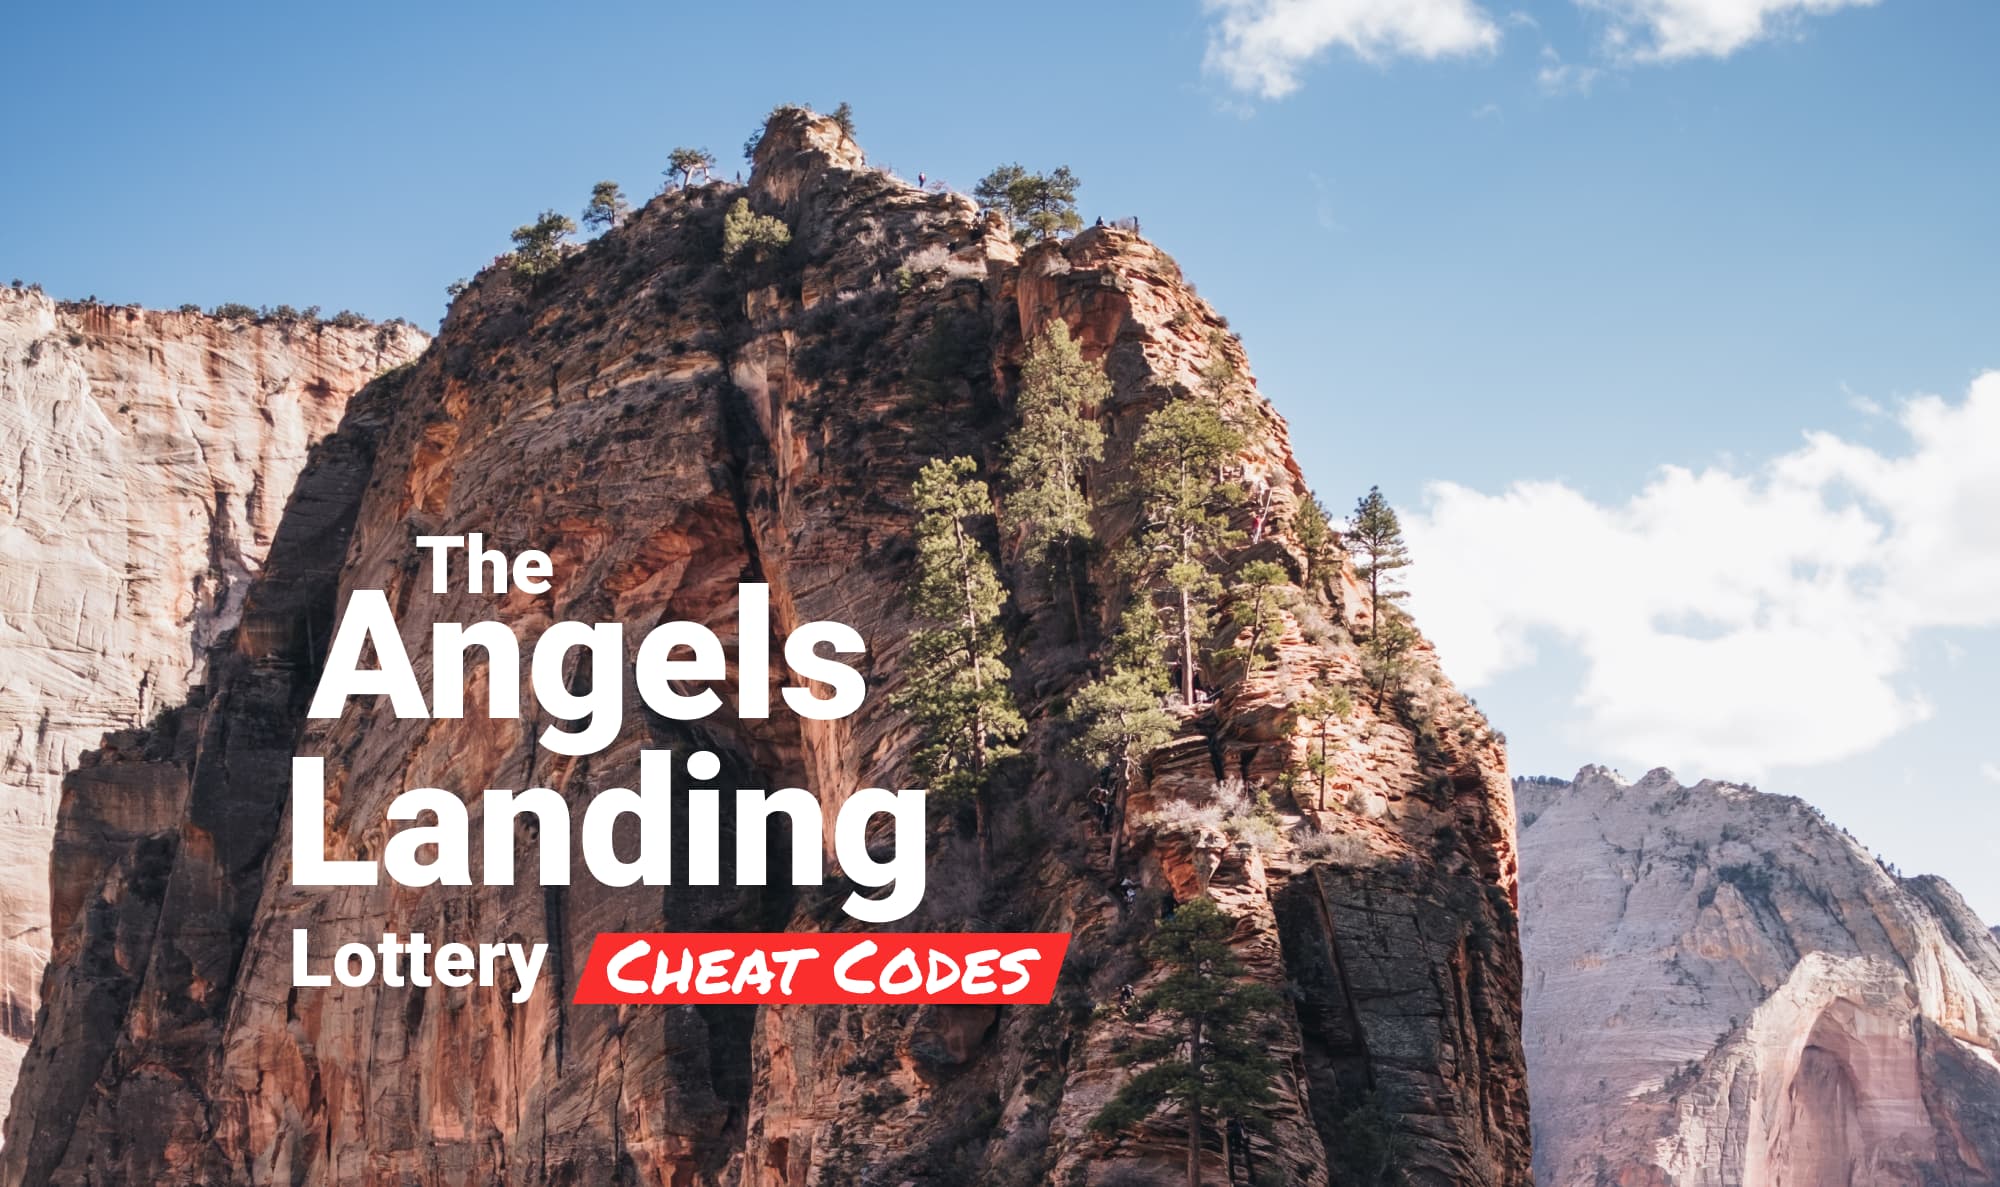 Angels Landing Lottery Cheat Codes